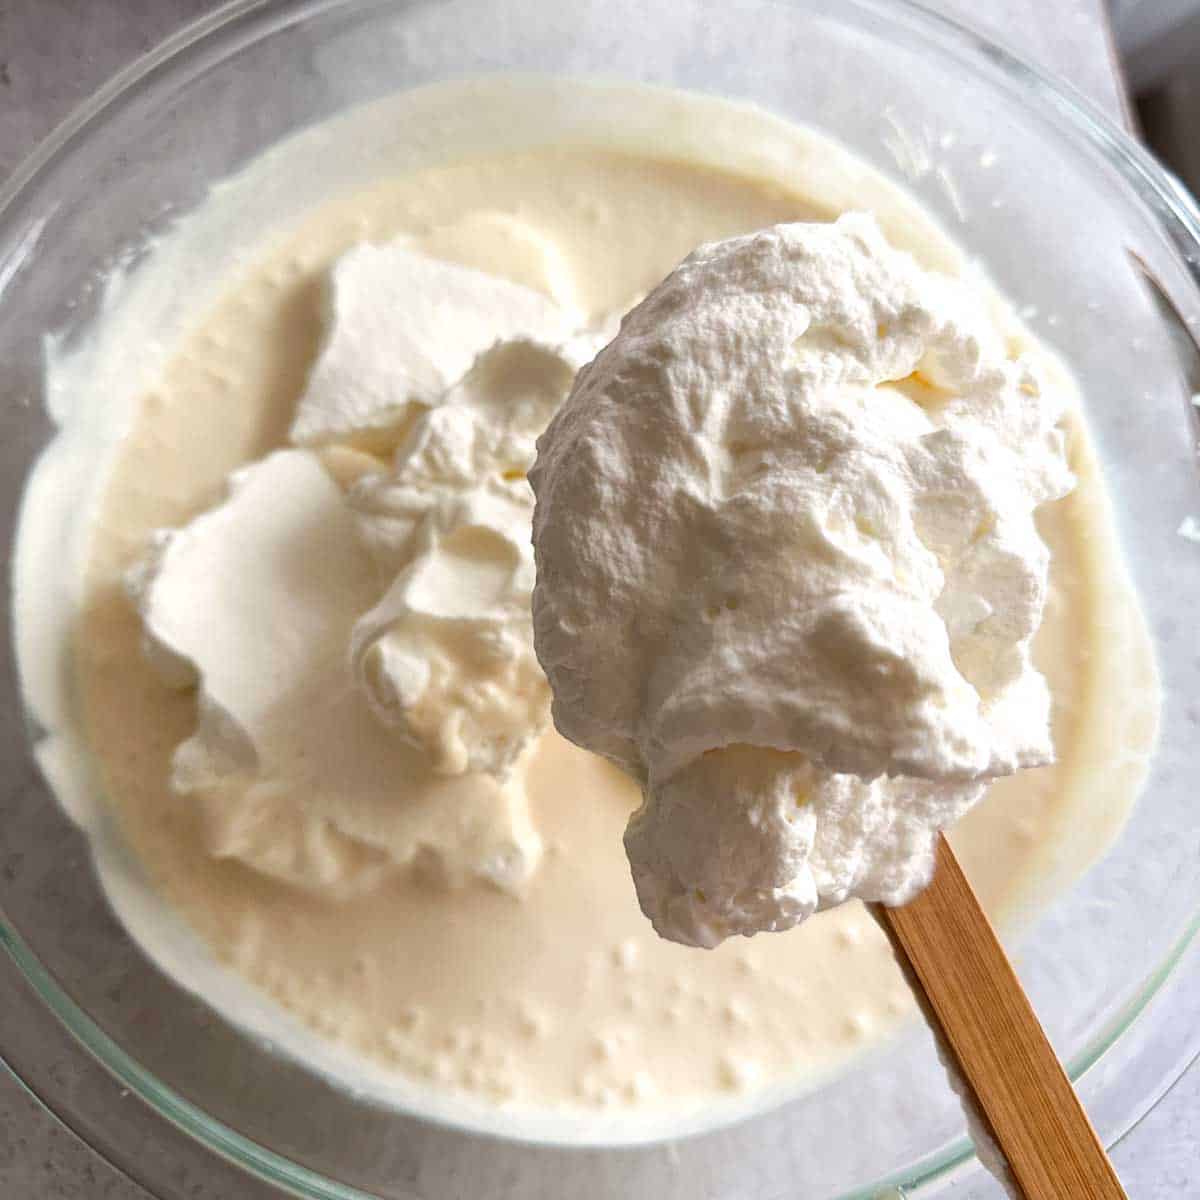 Whipped cream being folded into a bowl of condensed milk